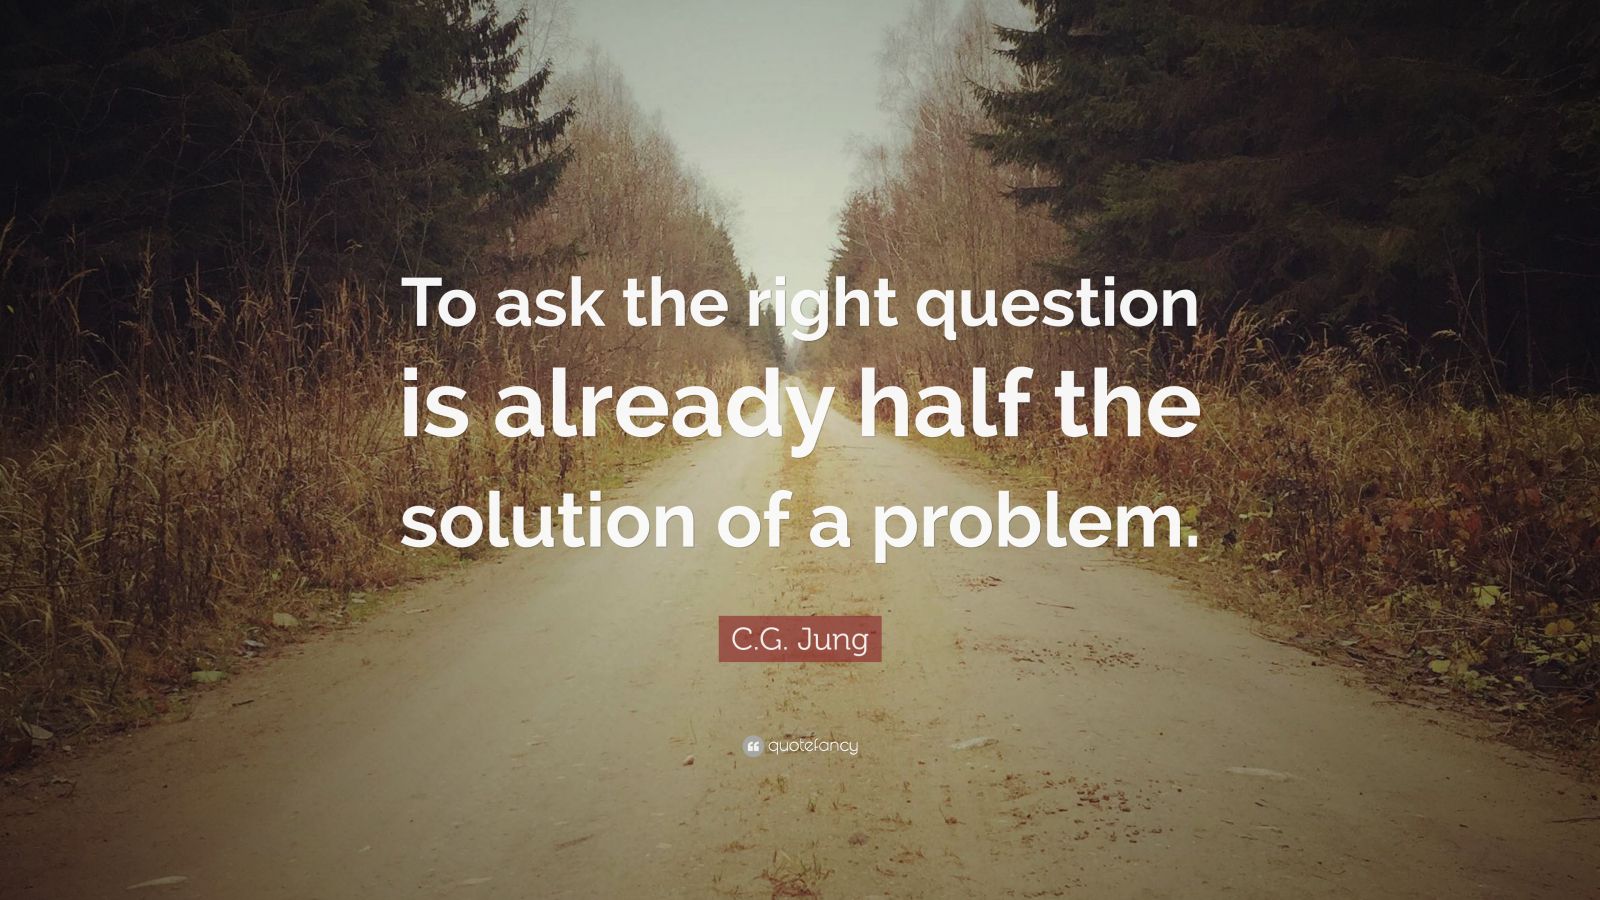 C.G. Jung Quote: “To ask the right question is already half the